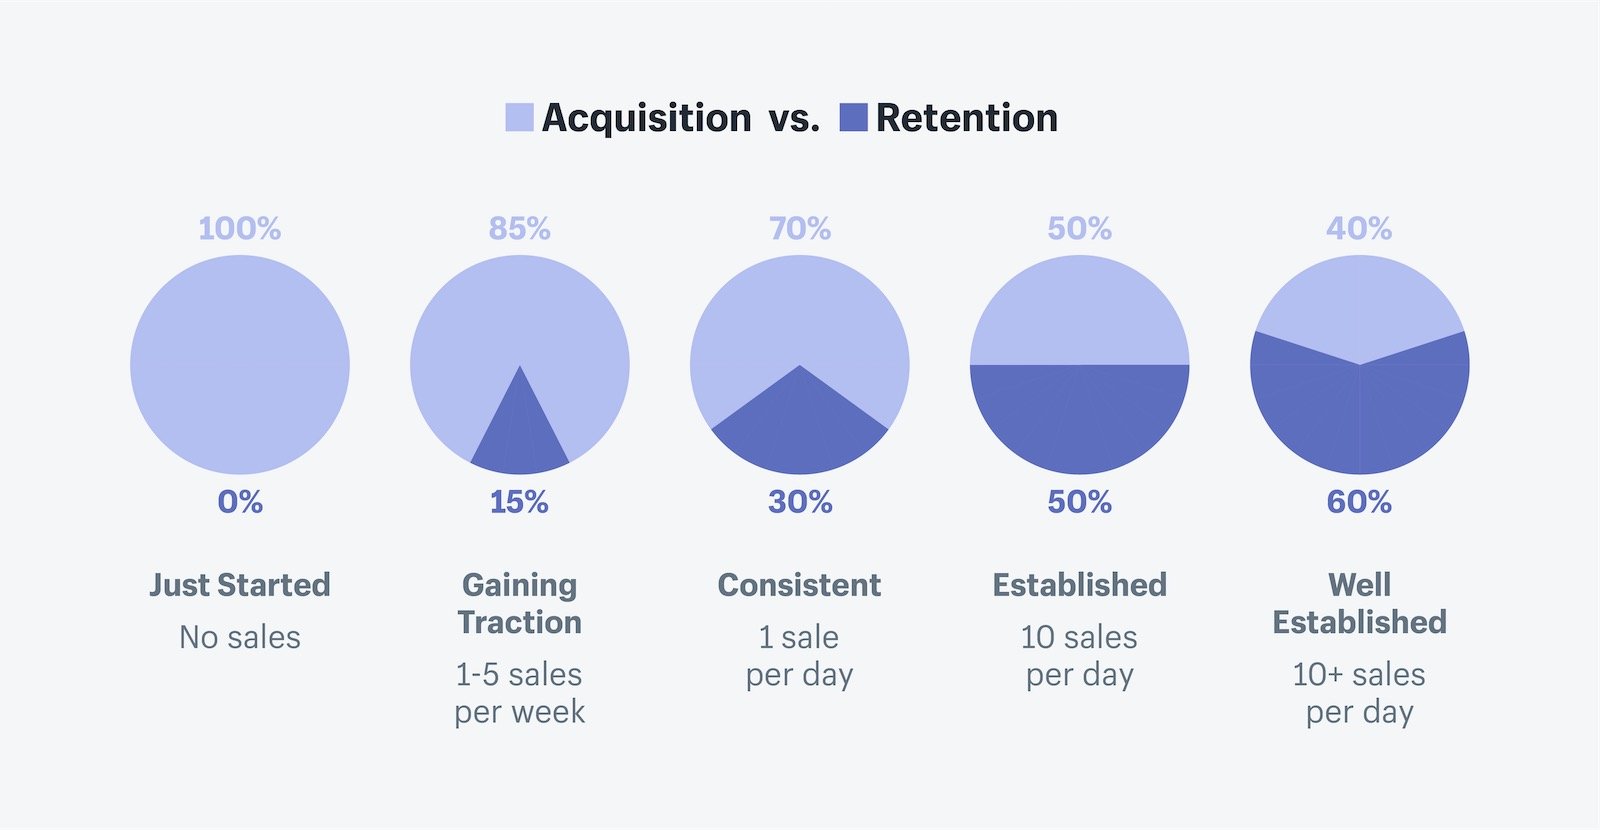 budget division between customer acquisition and retention.